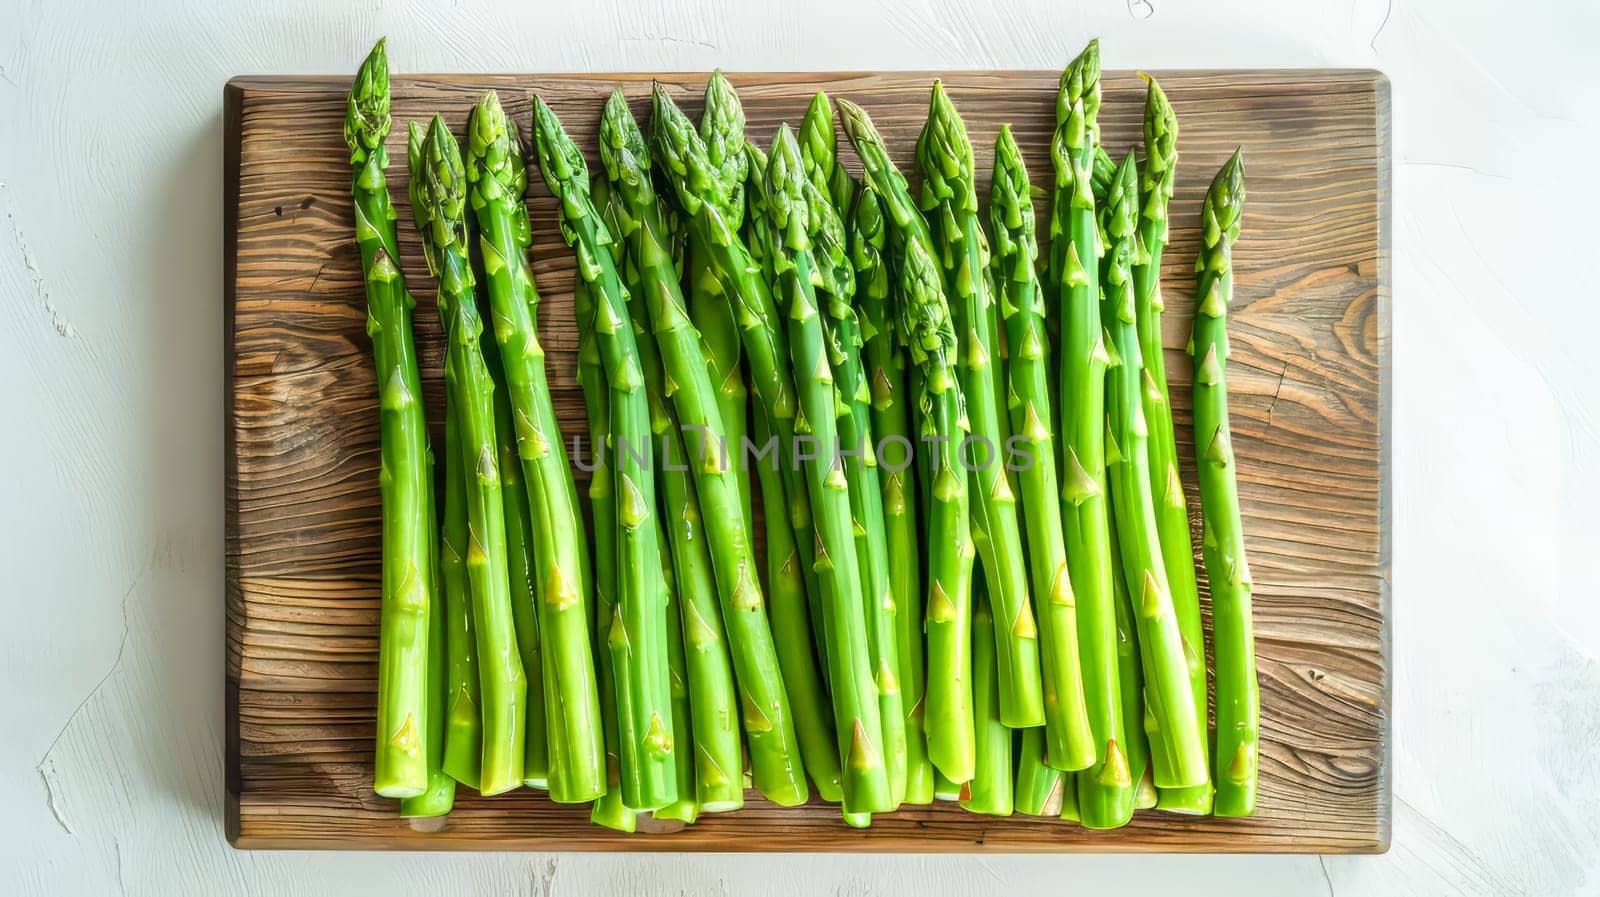 Bunch of fresh green asparagus on a wooden cutting board, top view, light background. Healthy food.